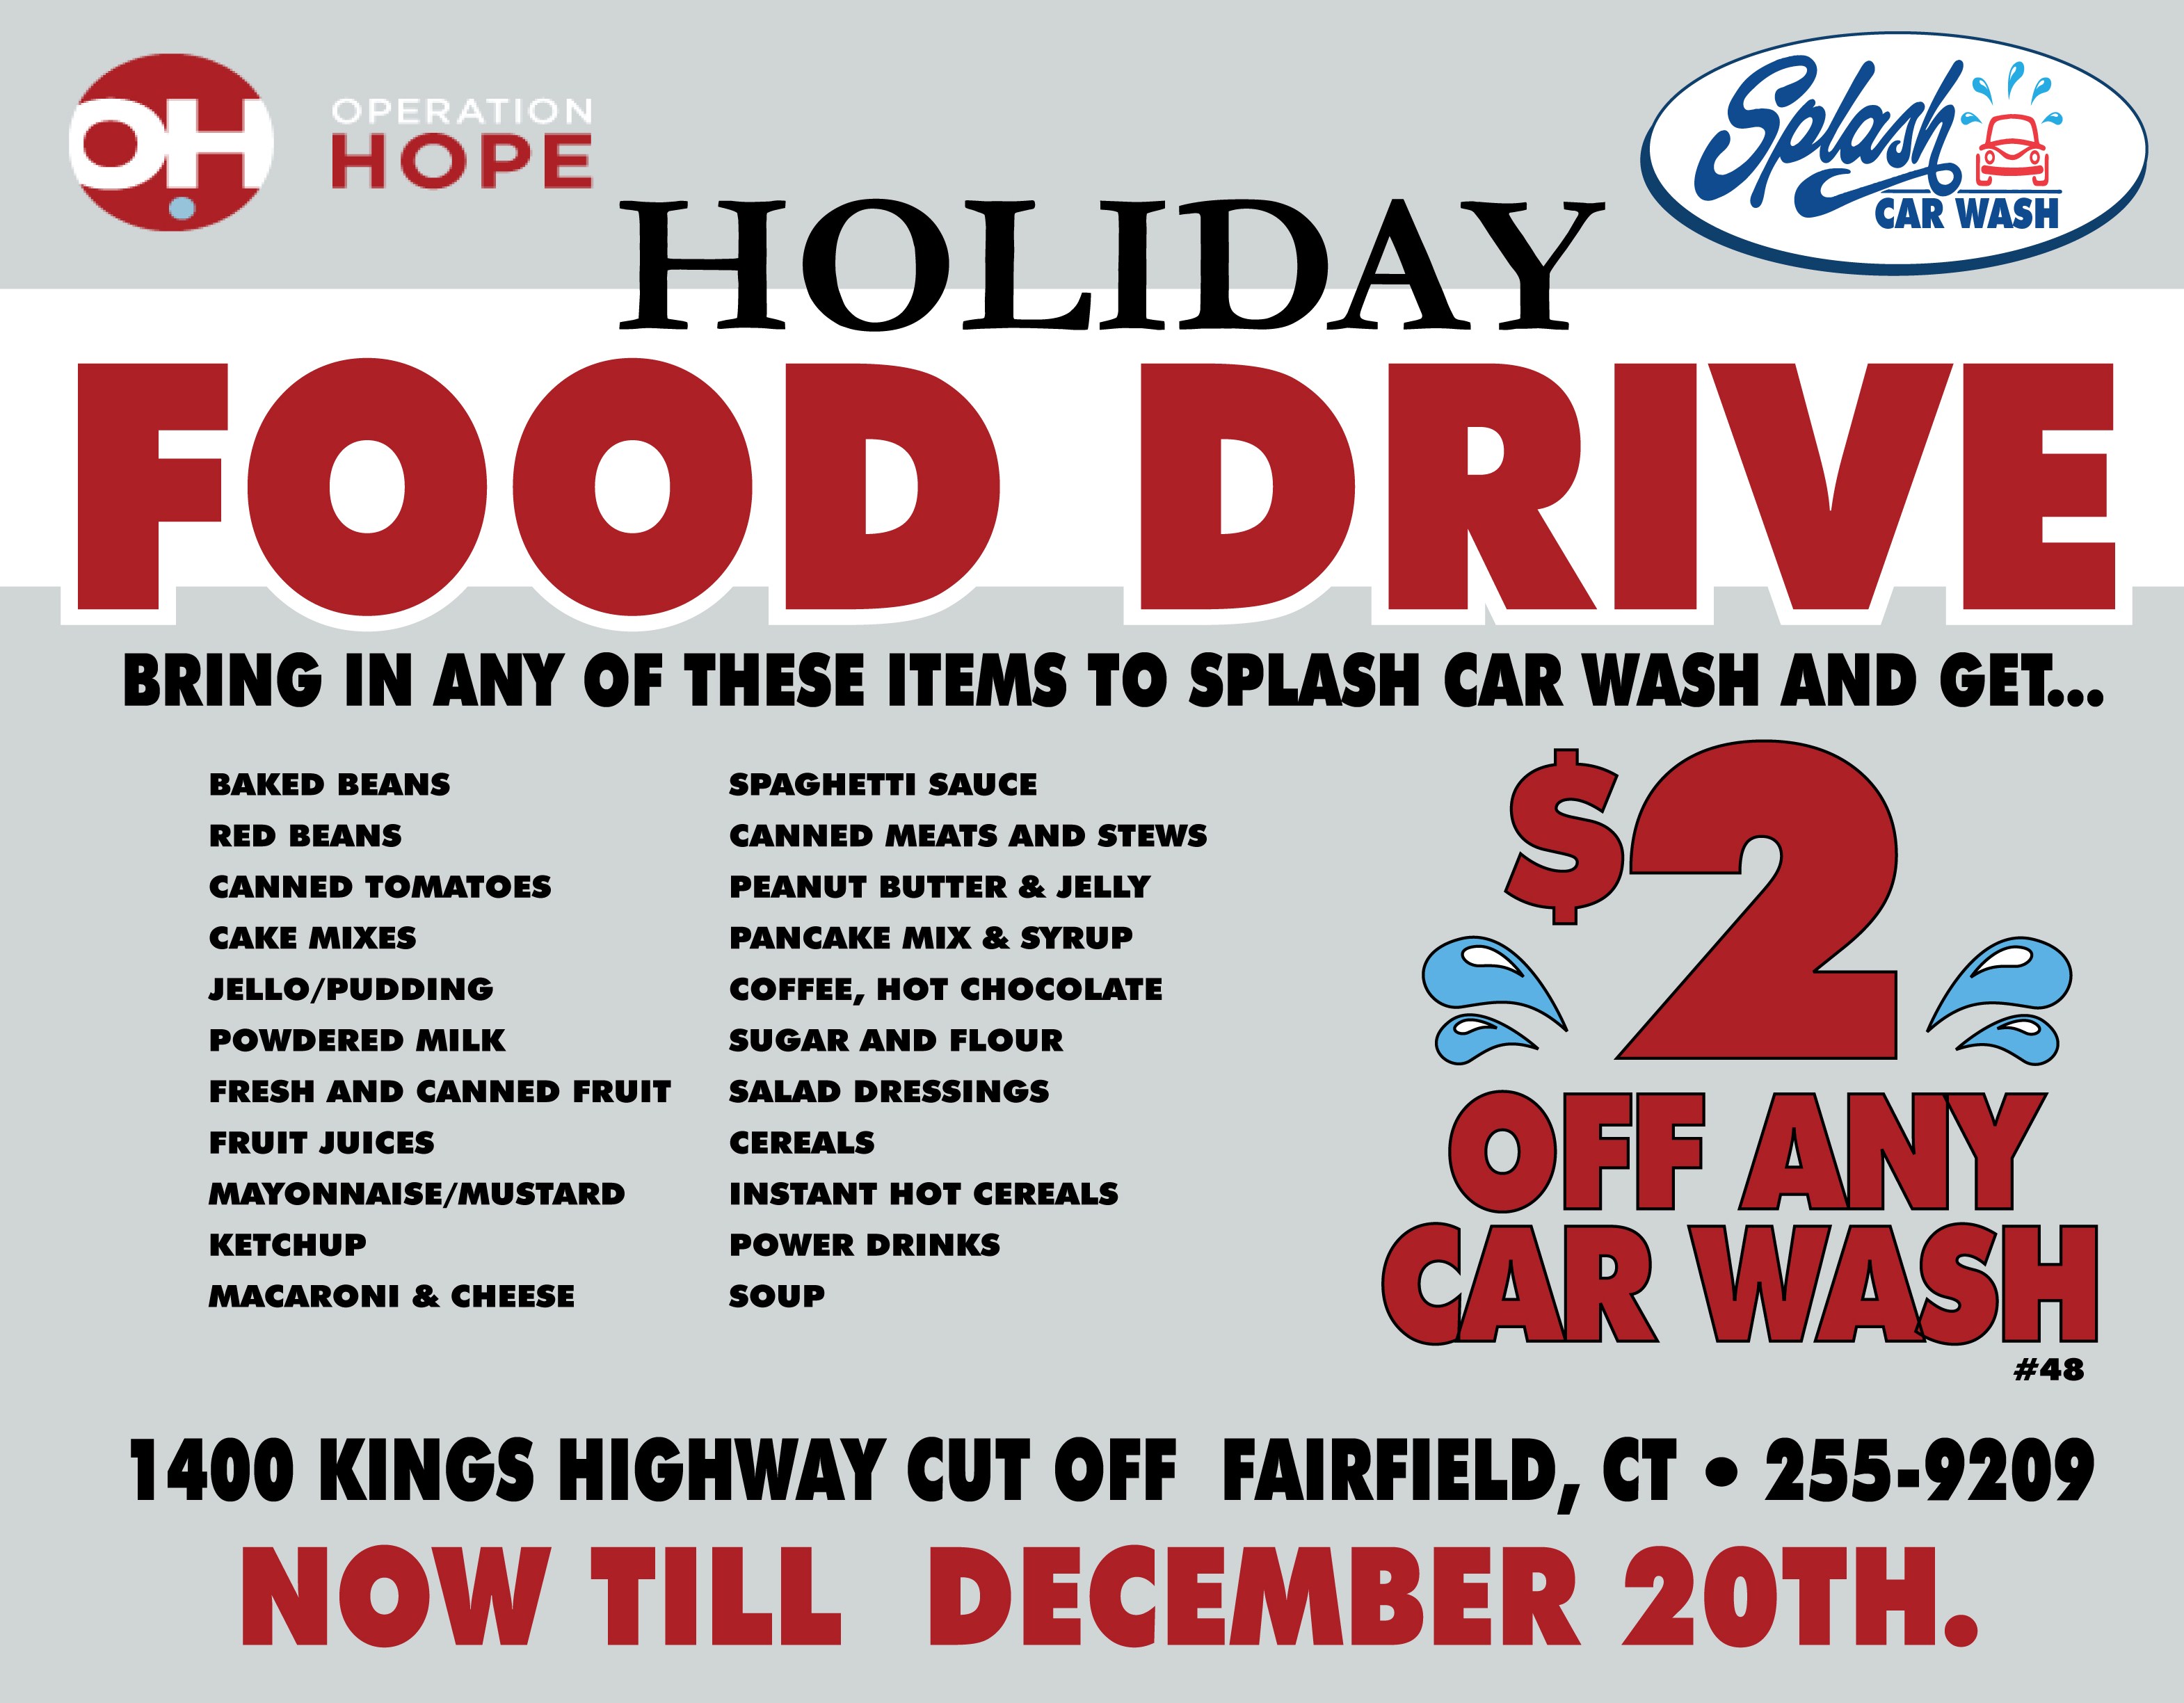 Save $2 on your next wash with the donation of food to Operation Hope.